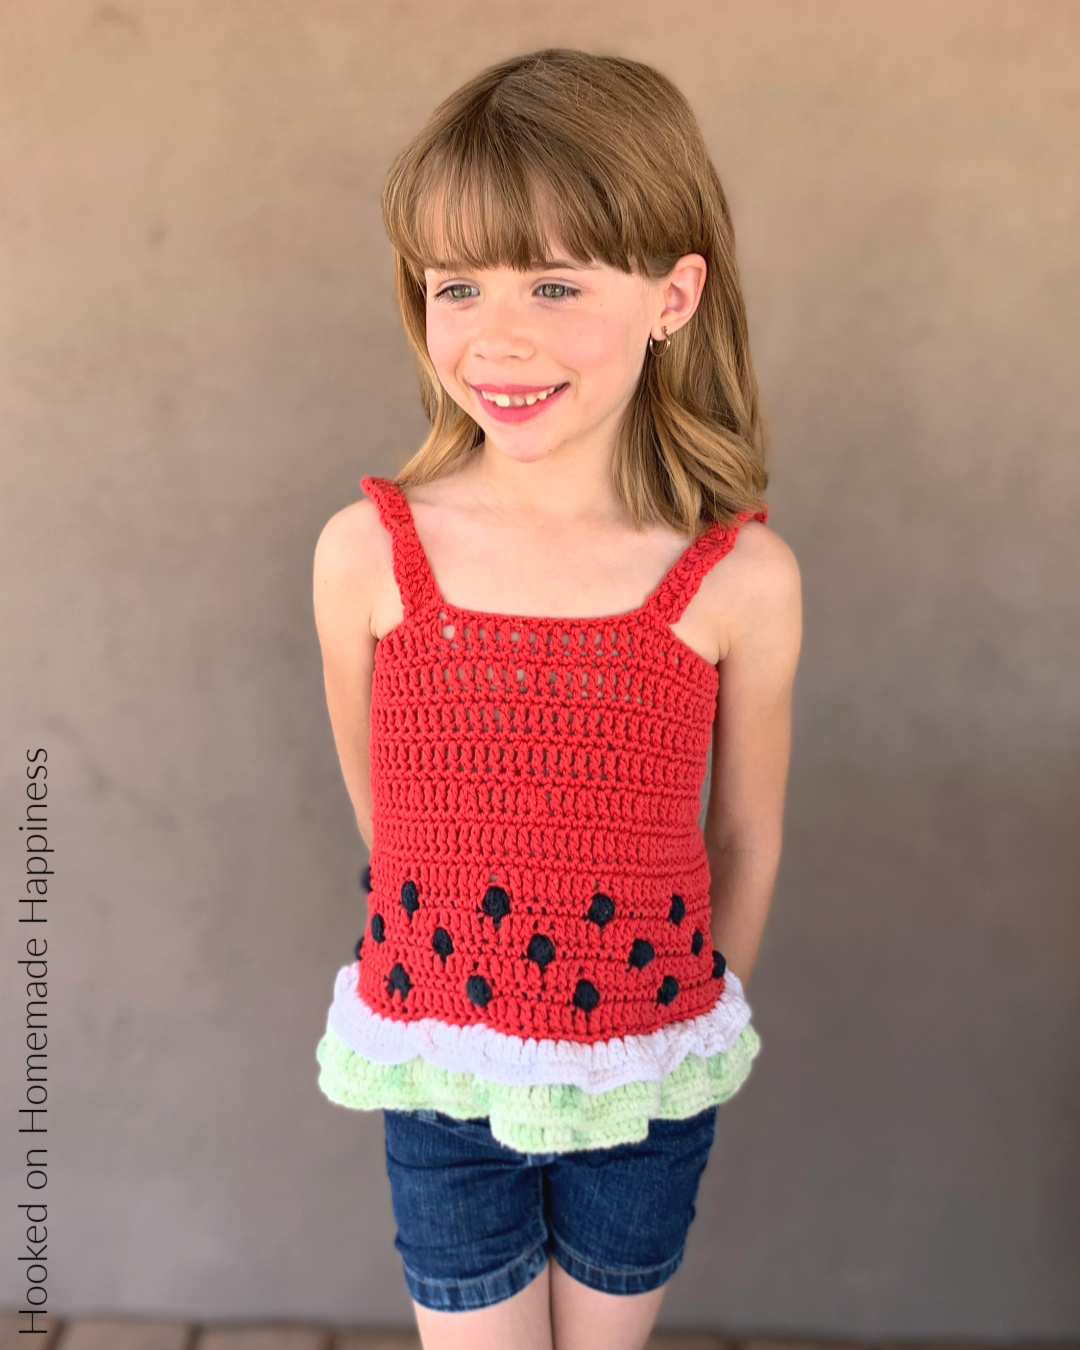 Watermelon Crochet Tank Top - Hooked on Homemade Happiness